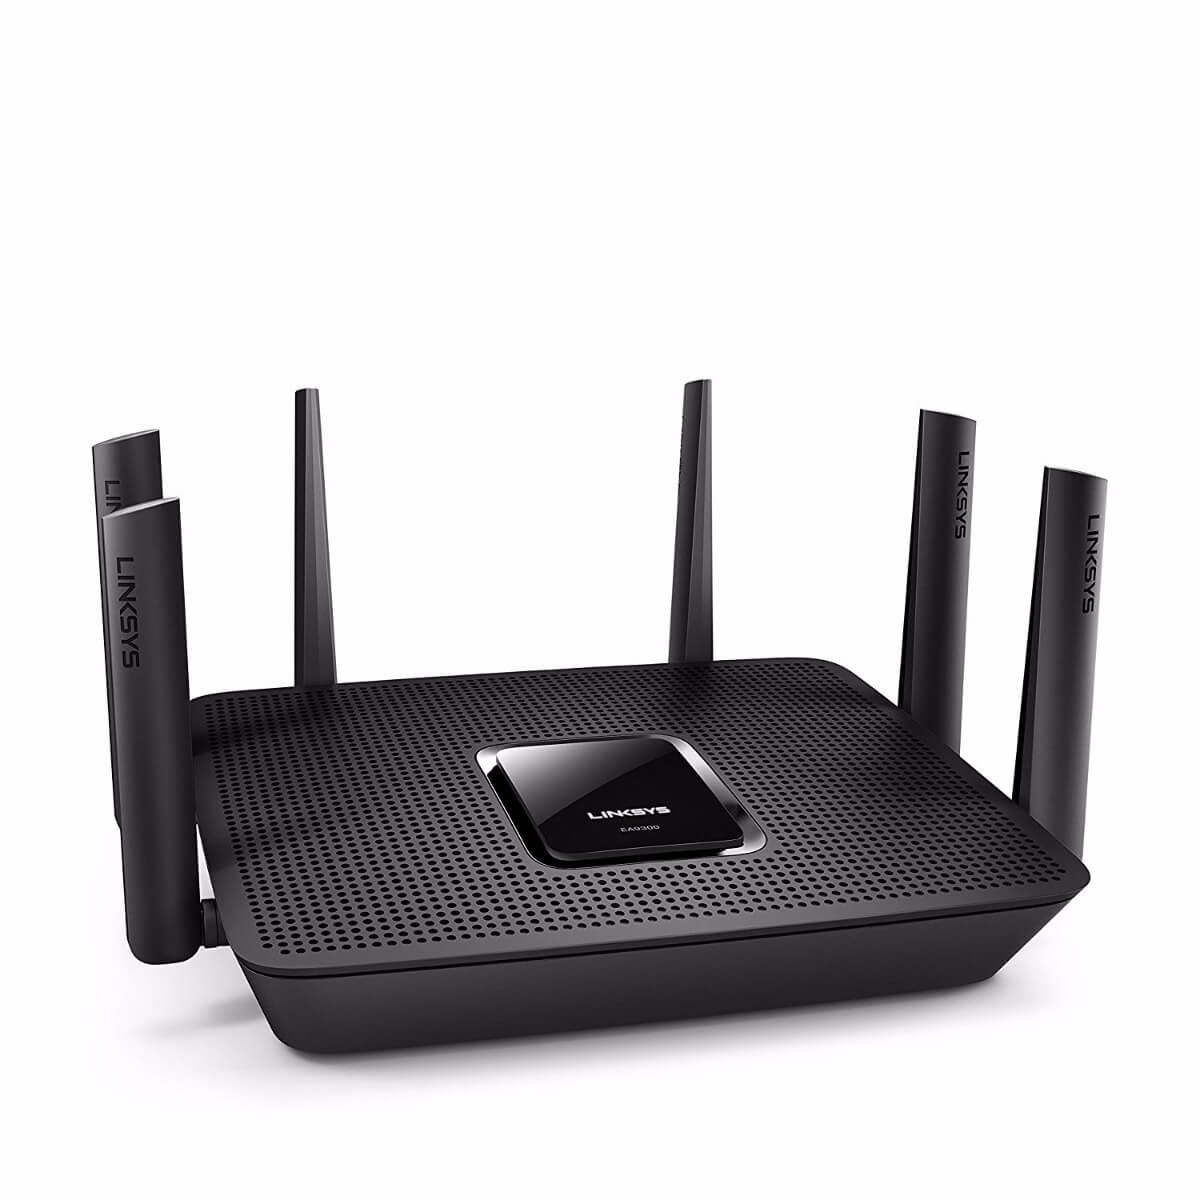 What is a wireless router?